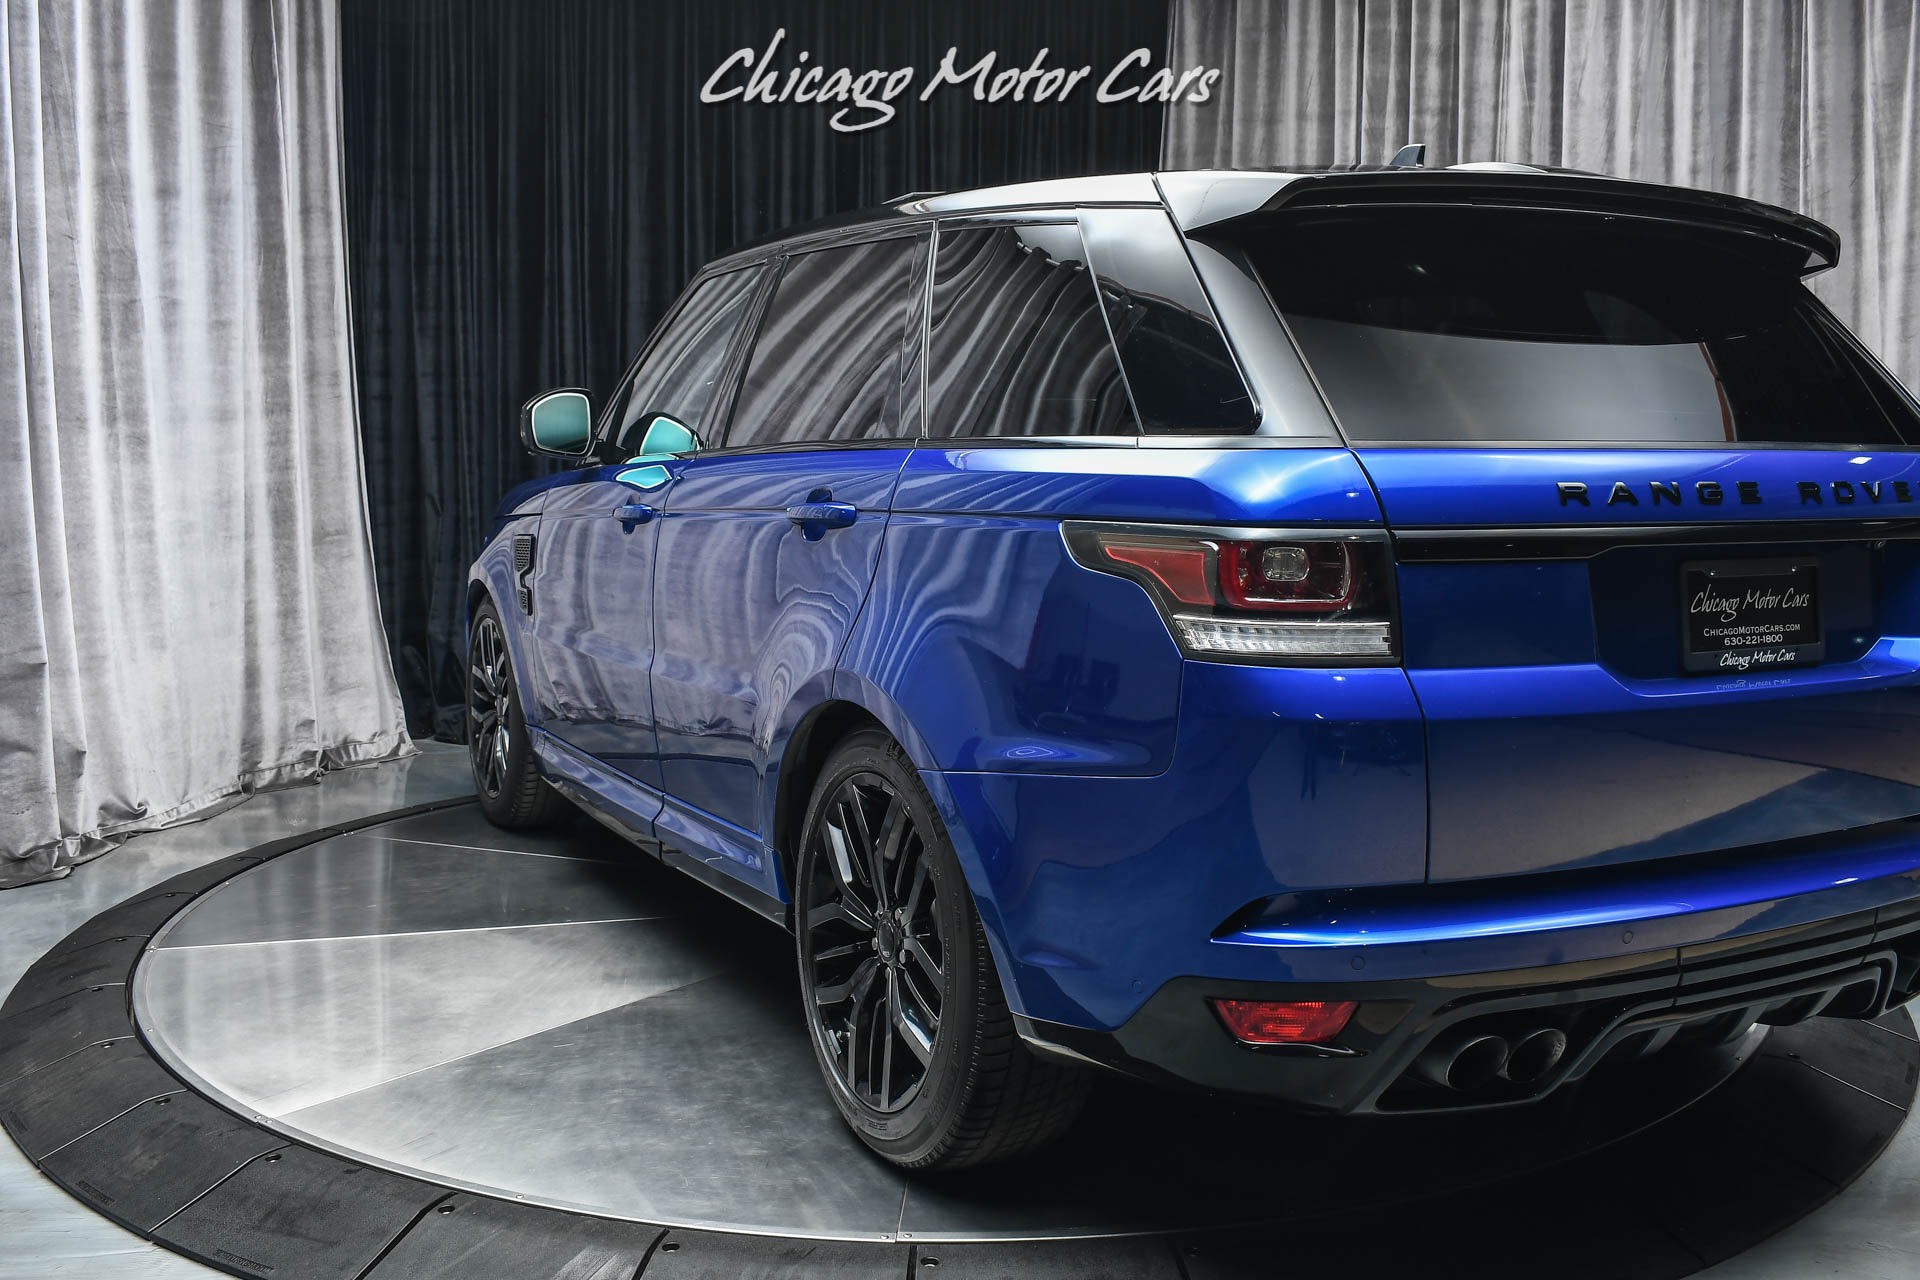 Used-2015-Land-Rover-Range-Rover-Sport-SVR-Loaded-with-Carbon-Fiber-Rare-Color-Combo-Adaptive-Cruise-Control